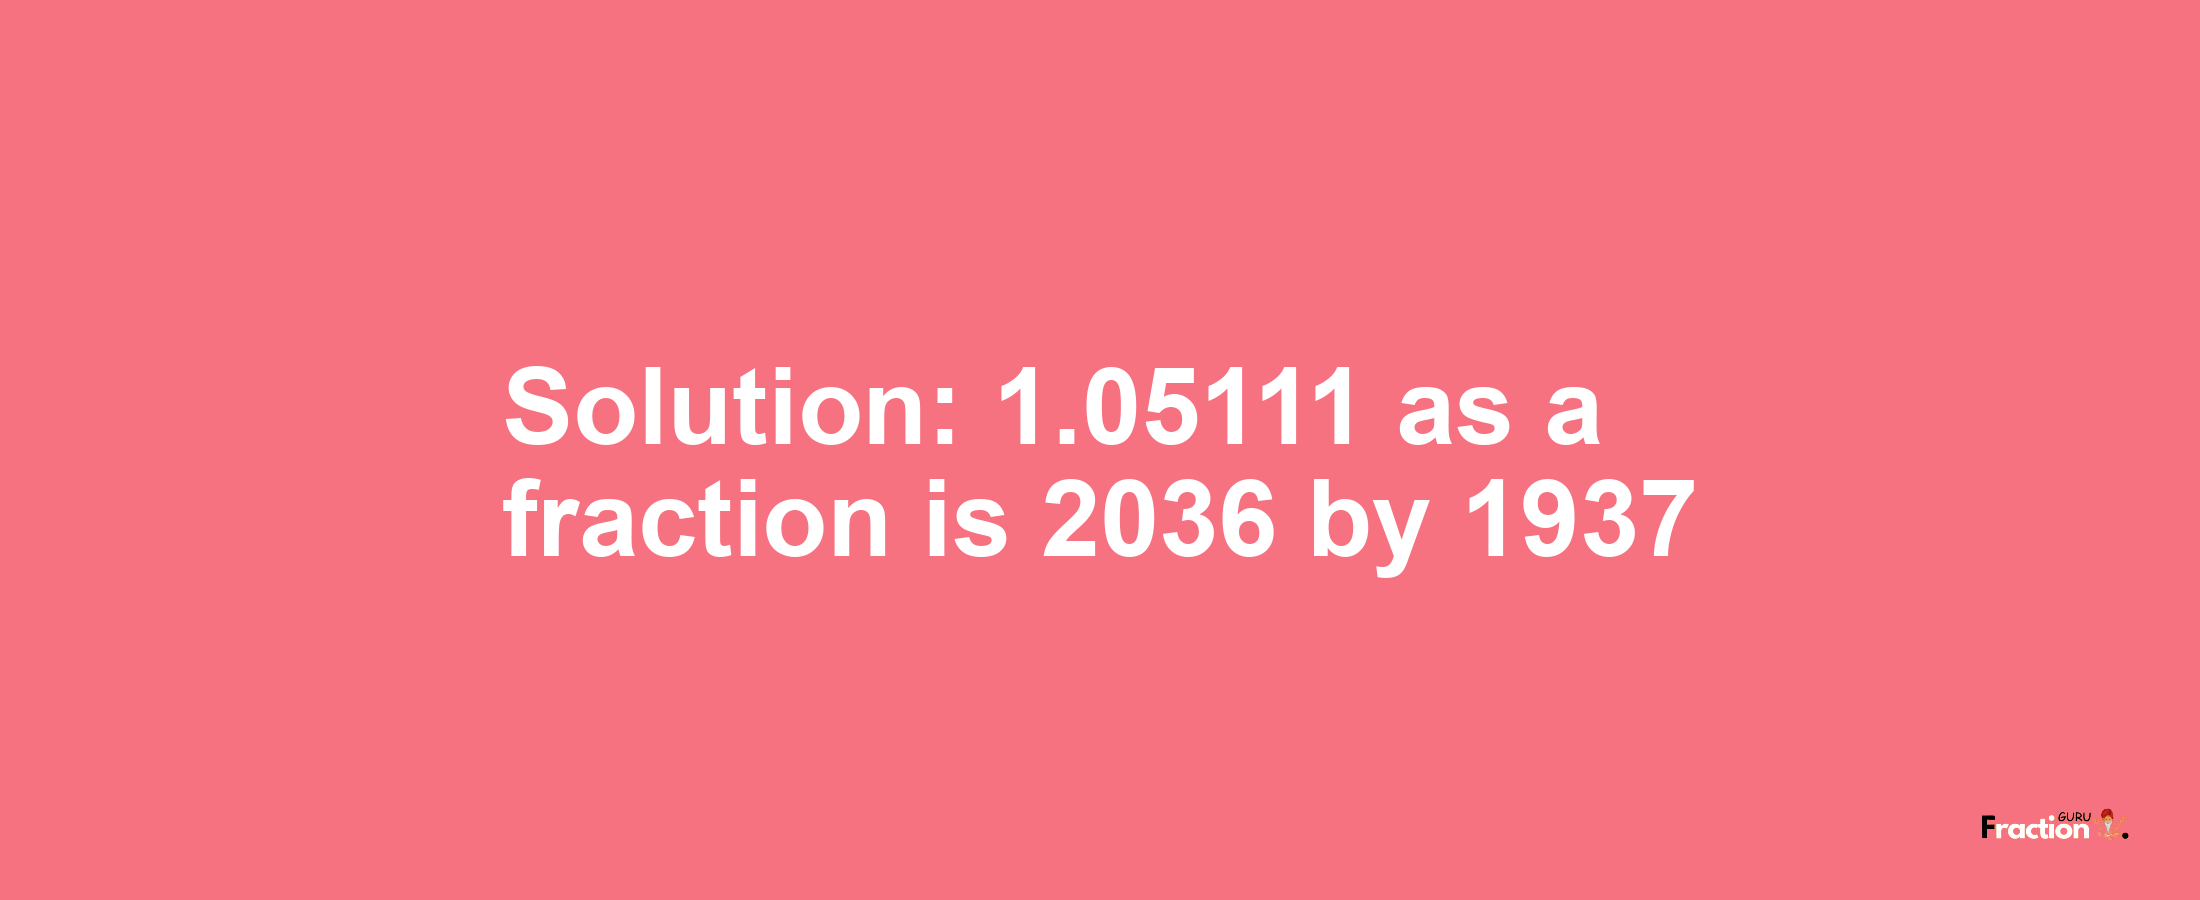 Solution:1.05111 as a fraction is 2036/1937